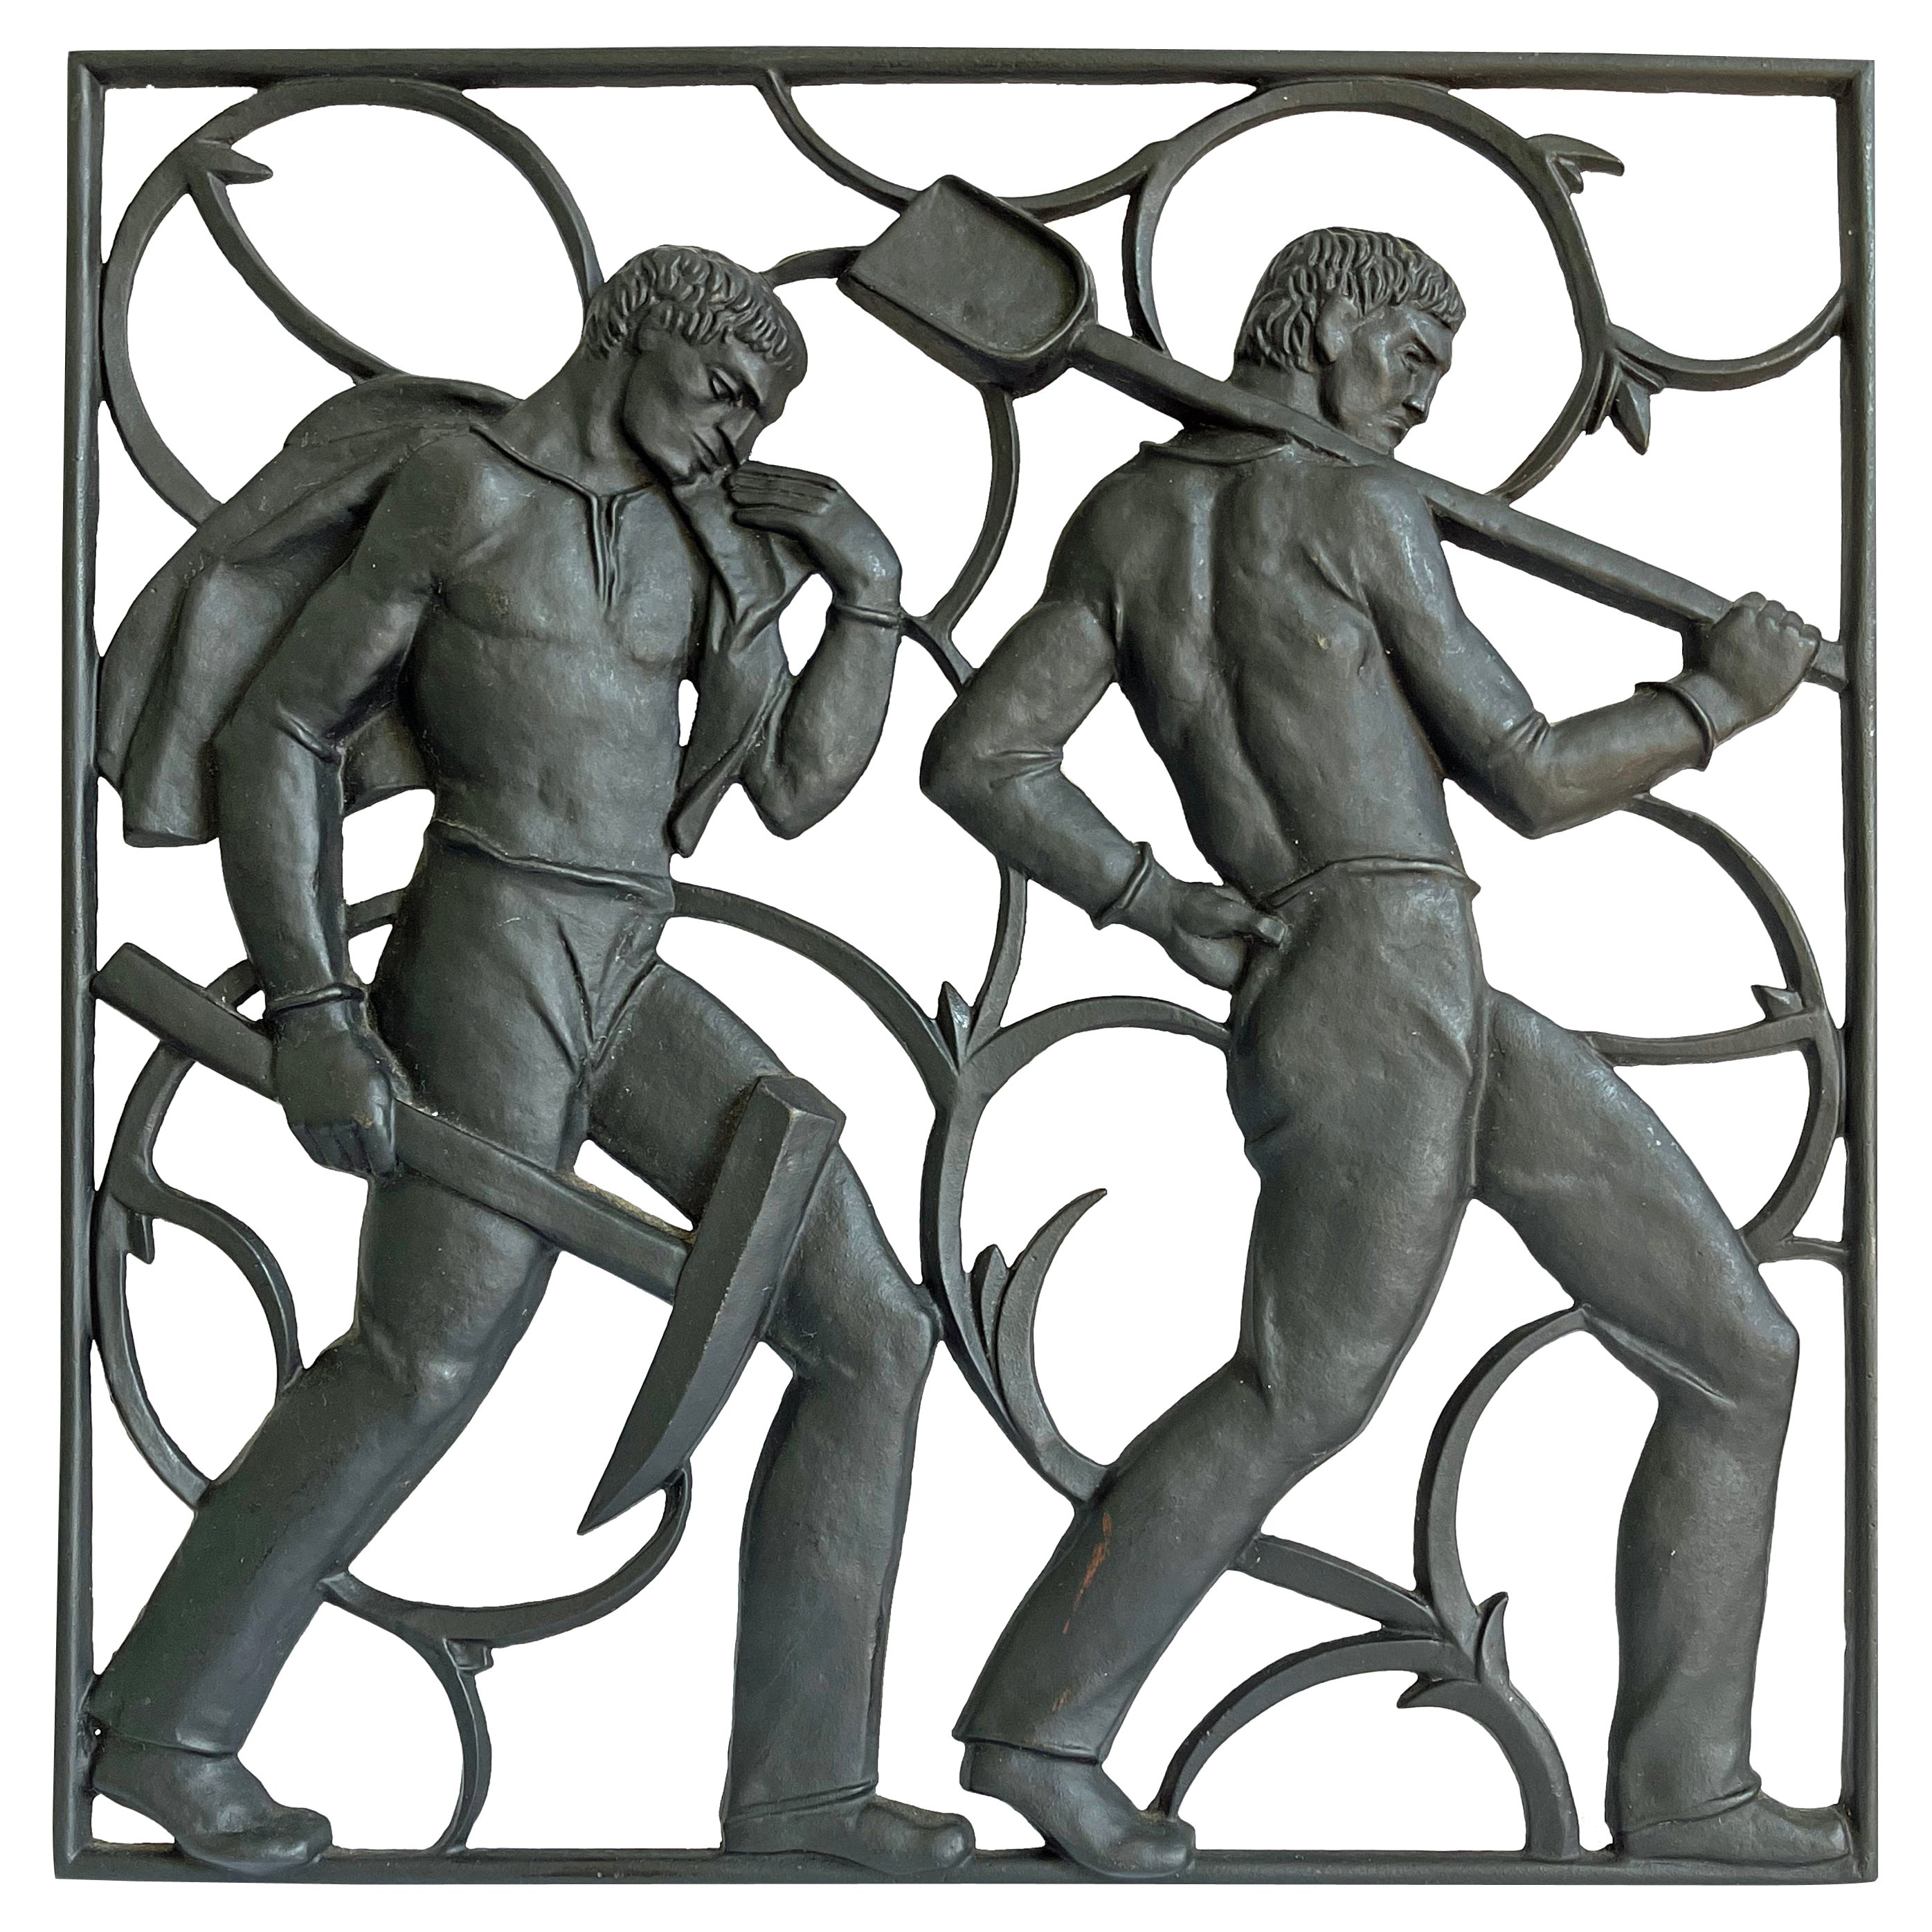 "Returning Miners, " Rare Art Deco Panel w/ Shirtless Laborers with Pick & Shovel